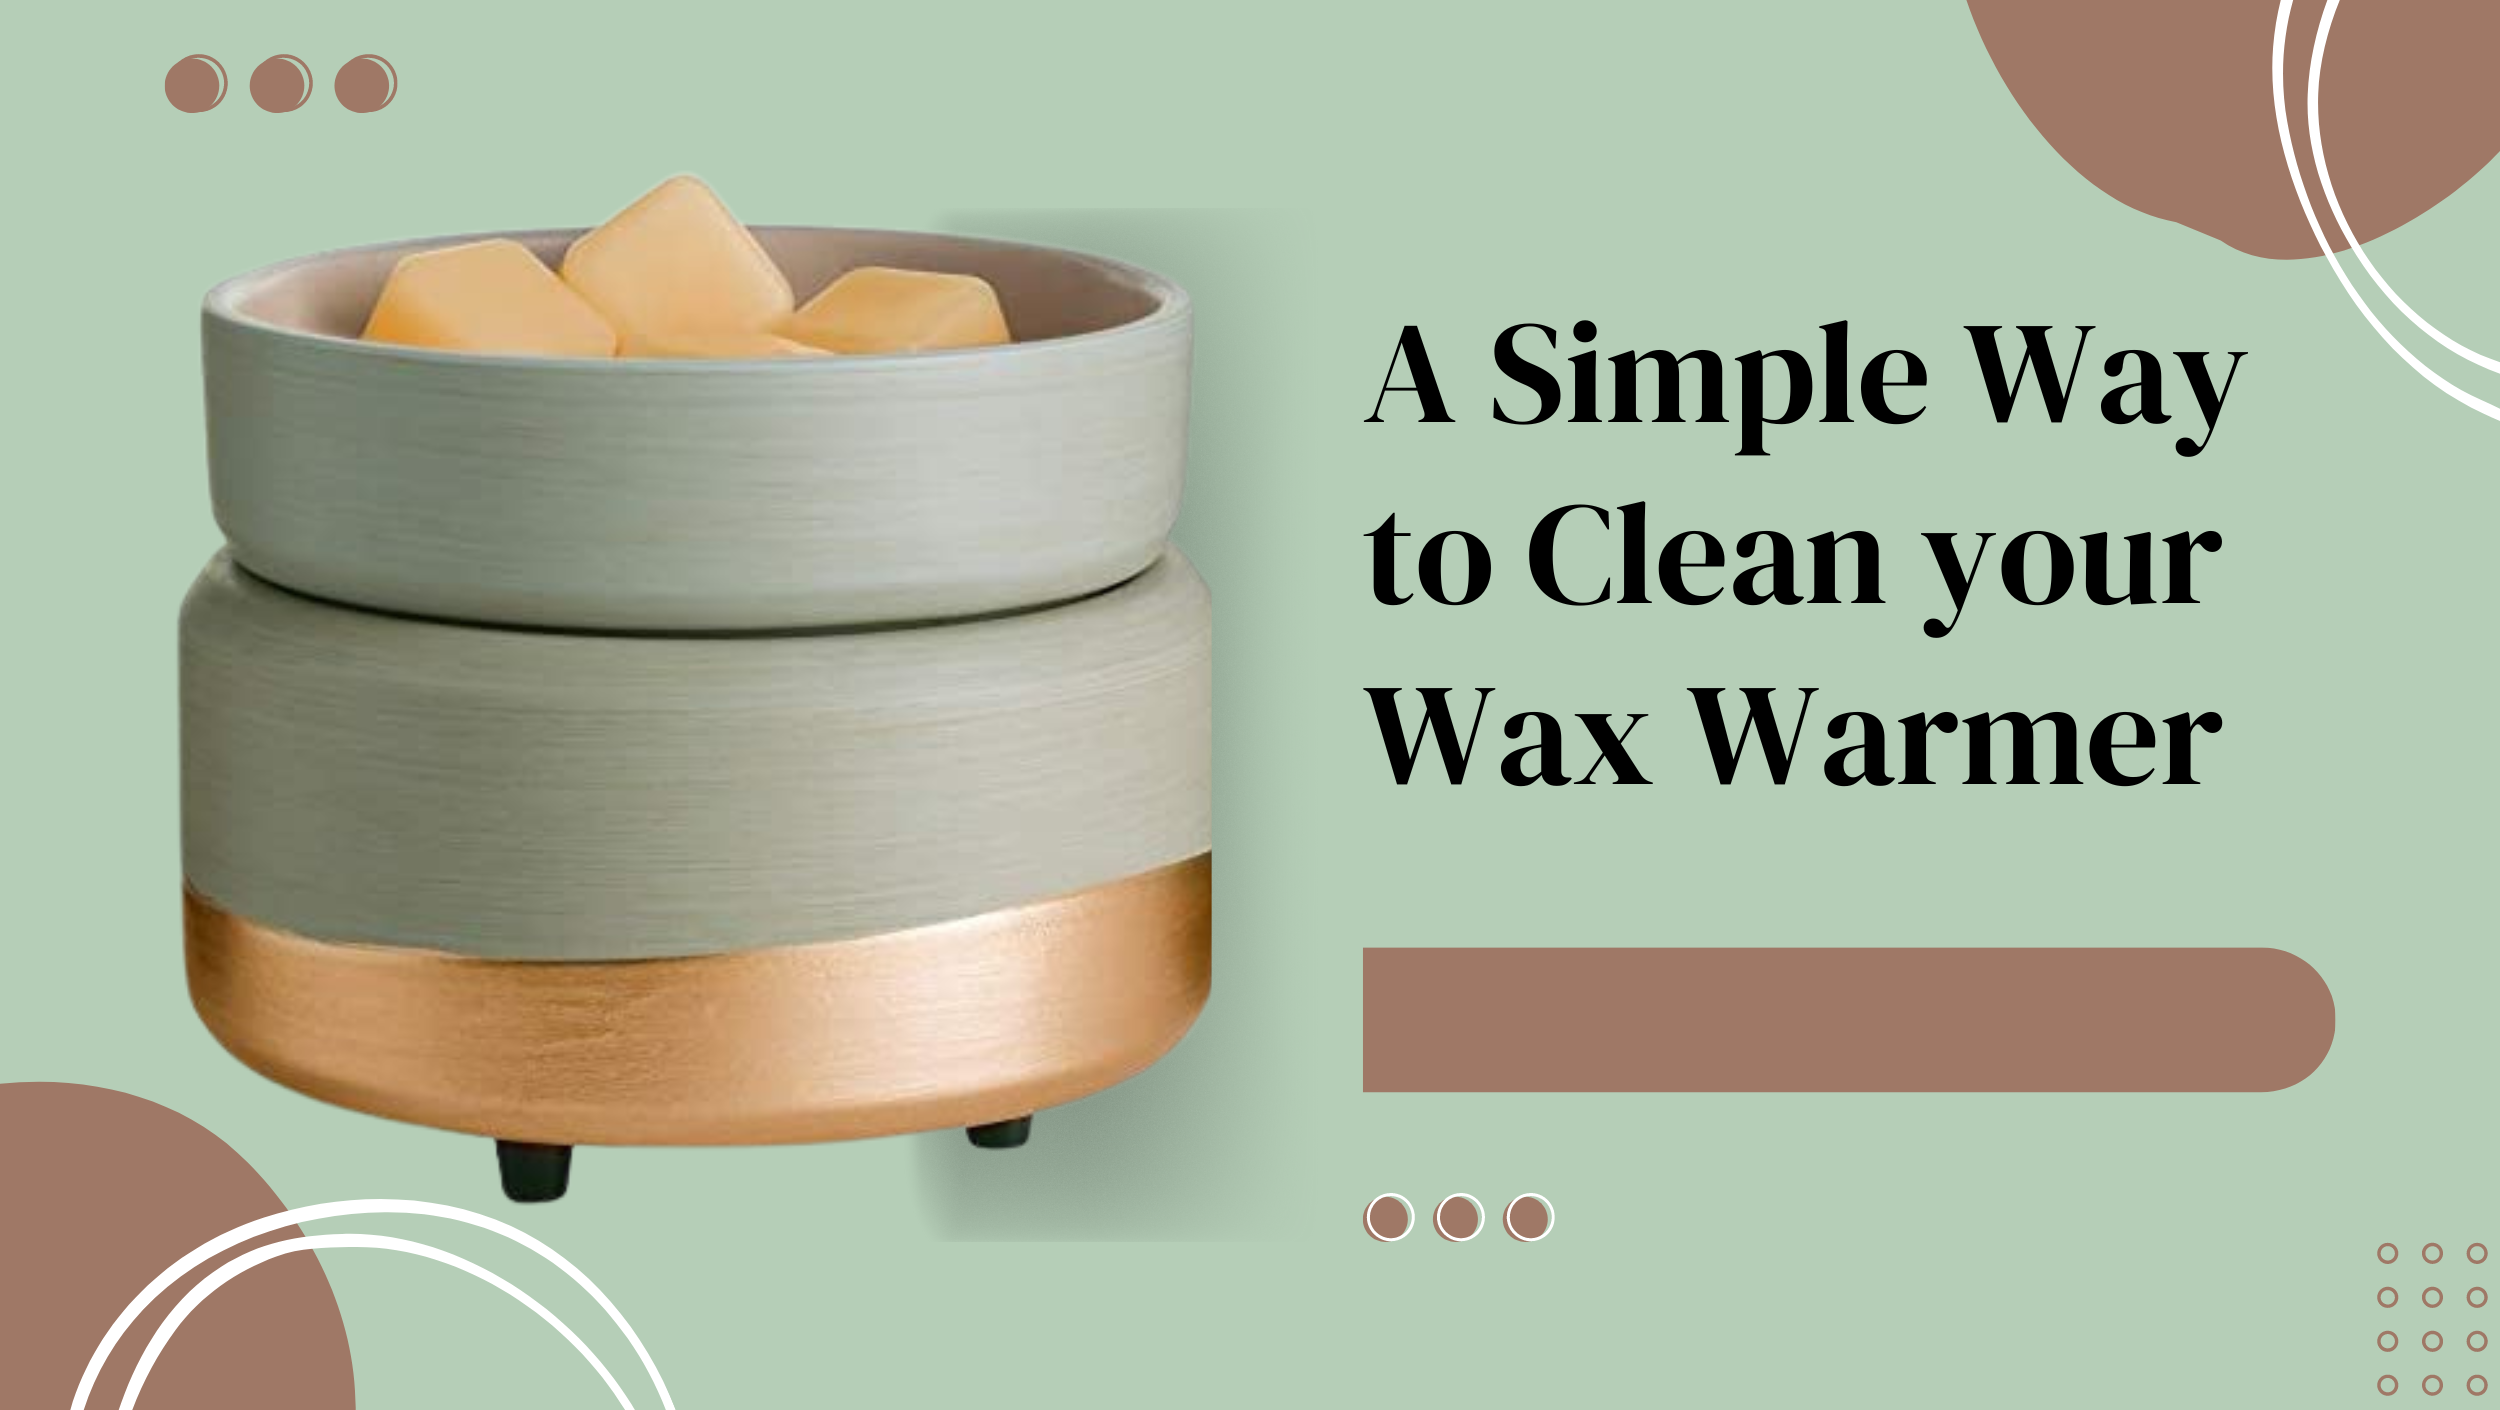 A Simple Way to Clean your Wax Warmer